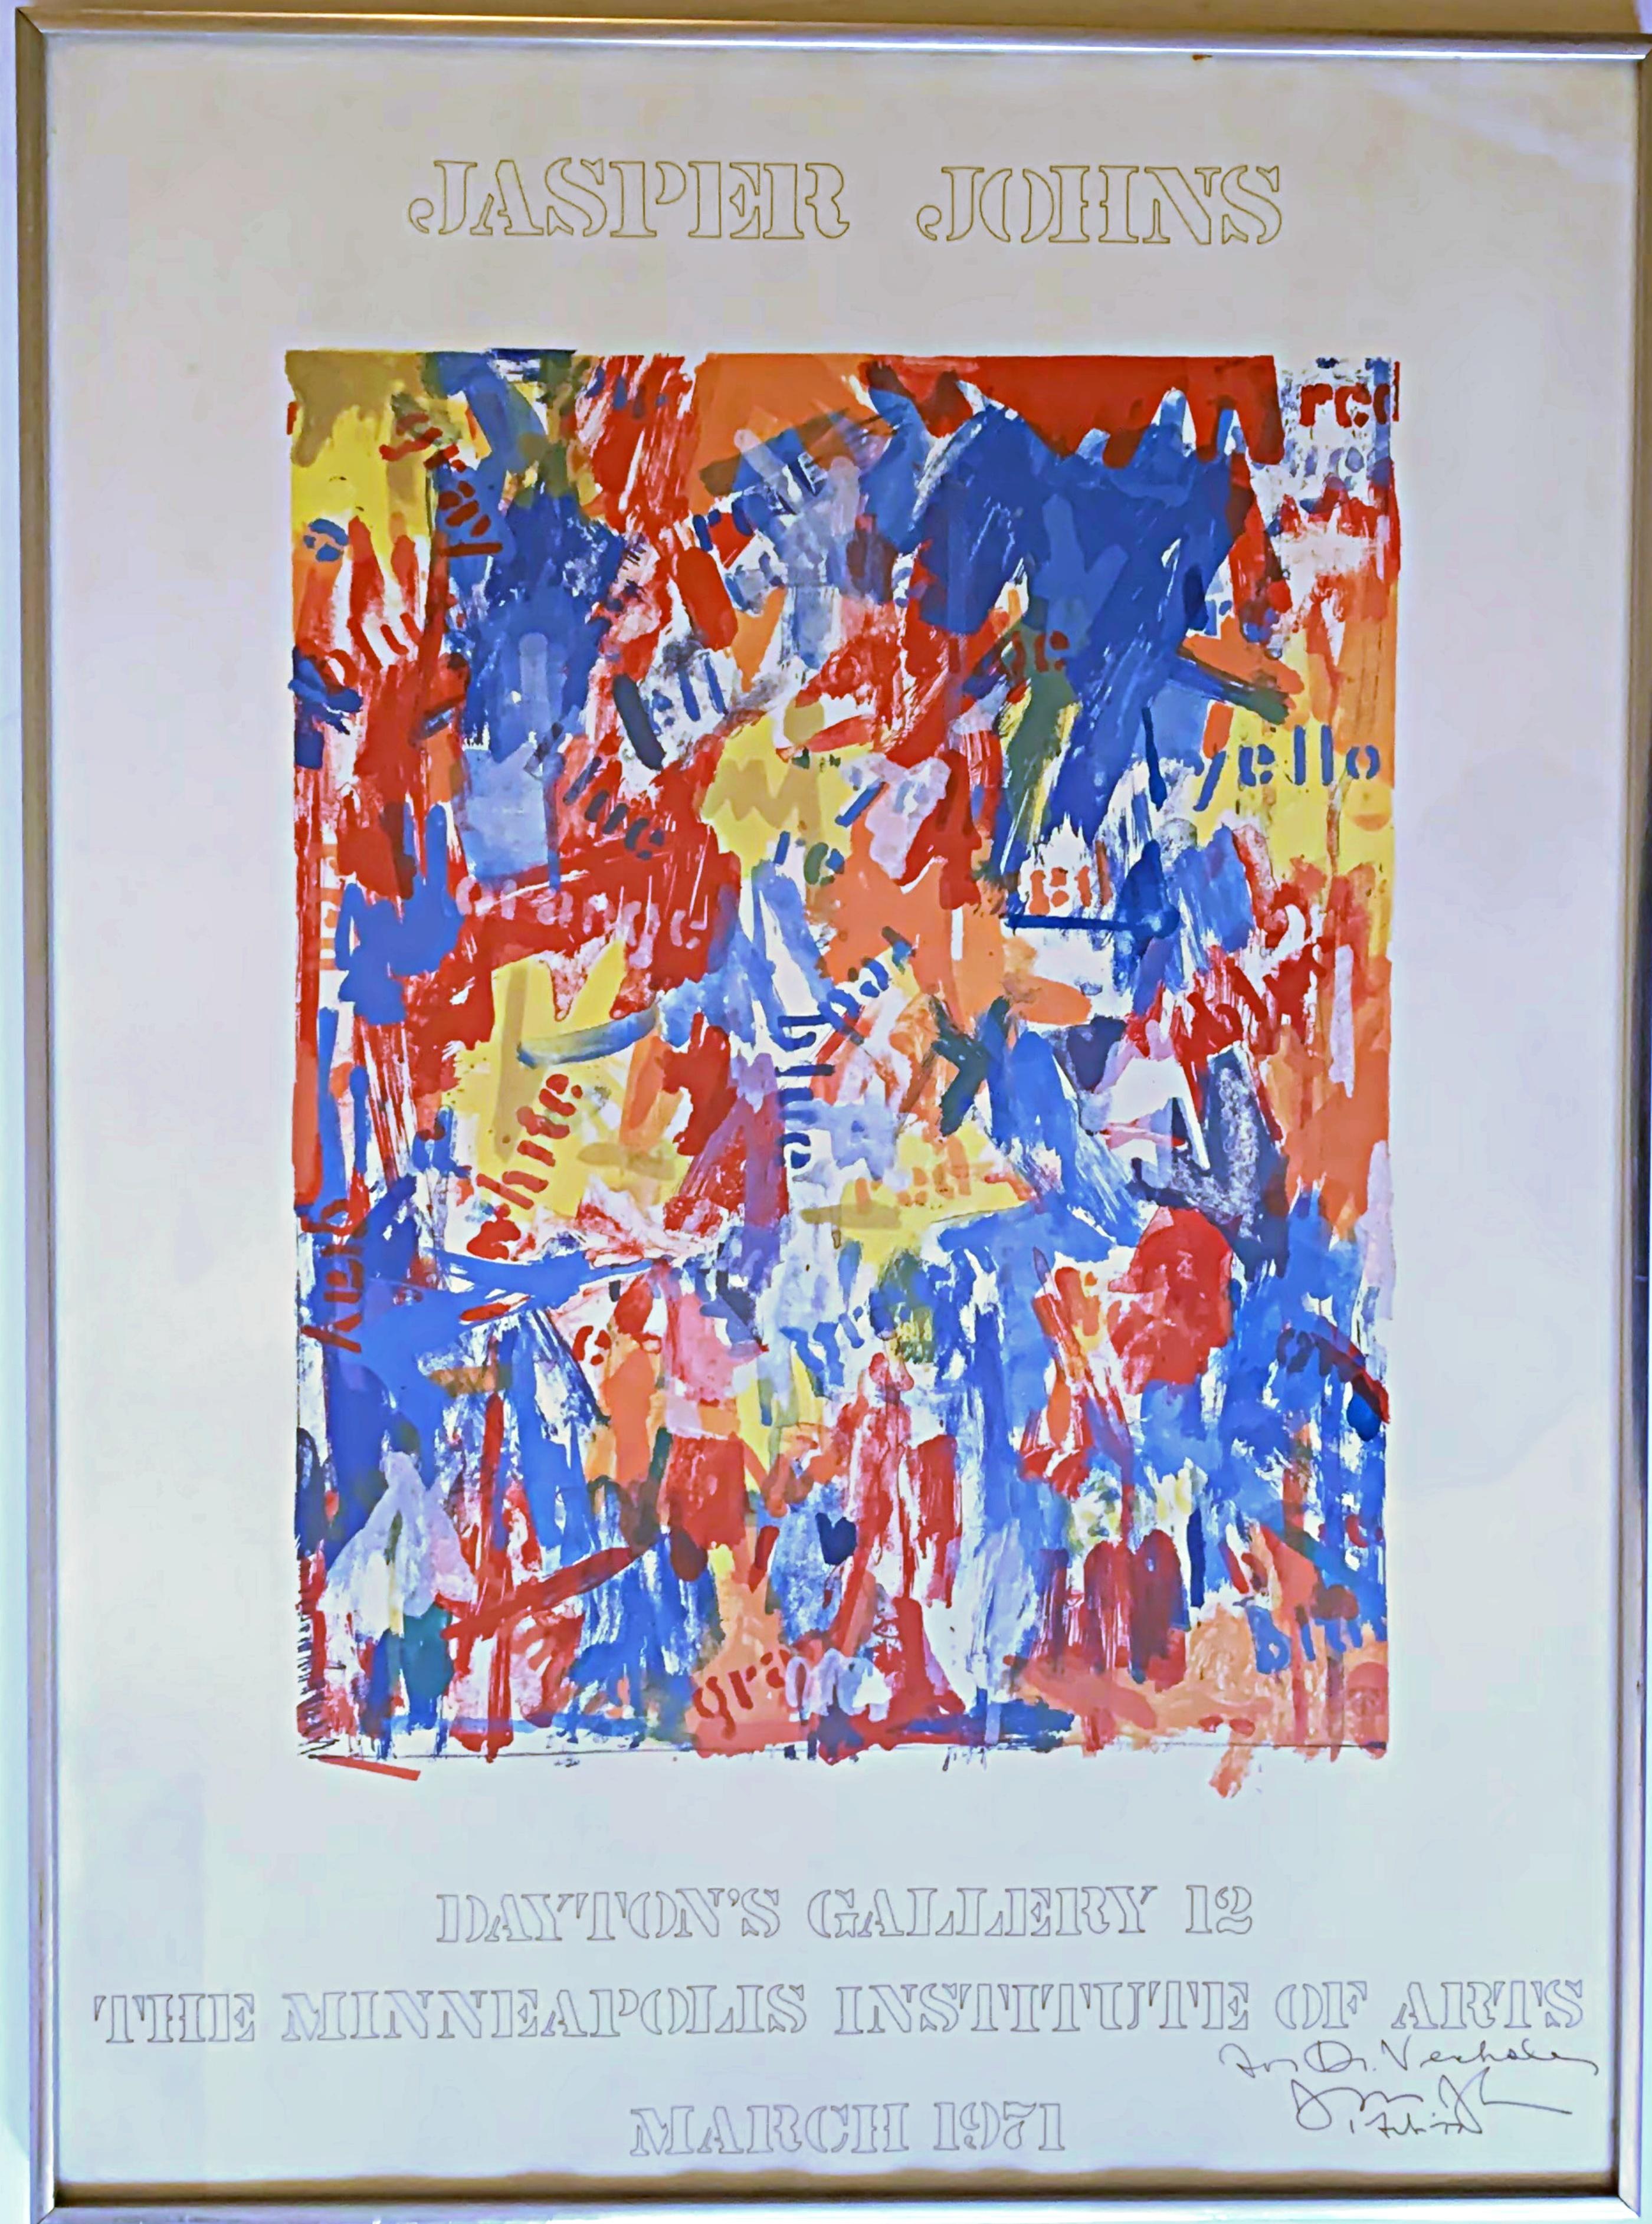 Jasper Johns Abstract Print - Vintage Poster (Hand Signed and Inscribed)